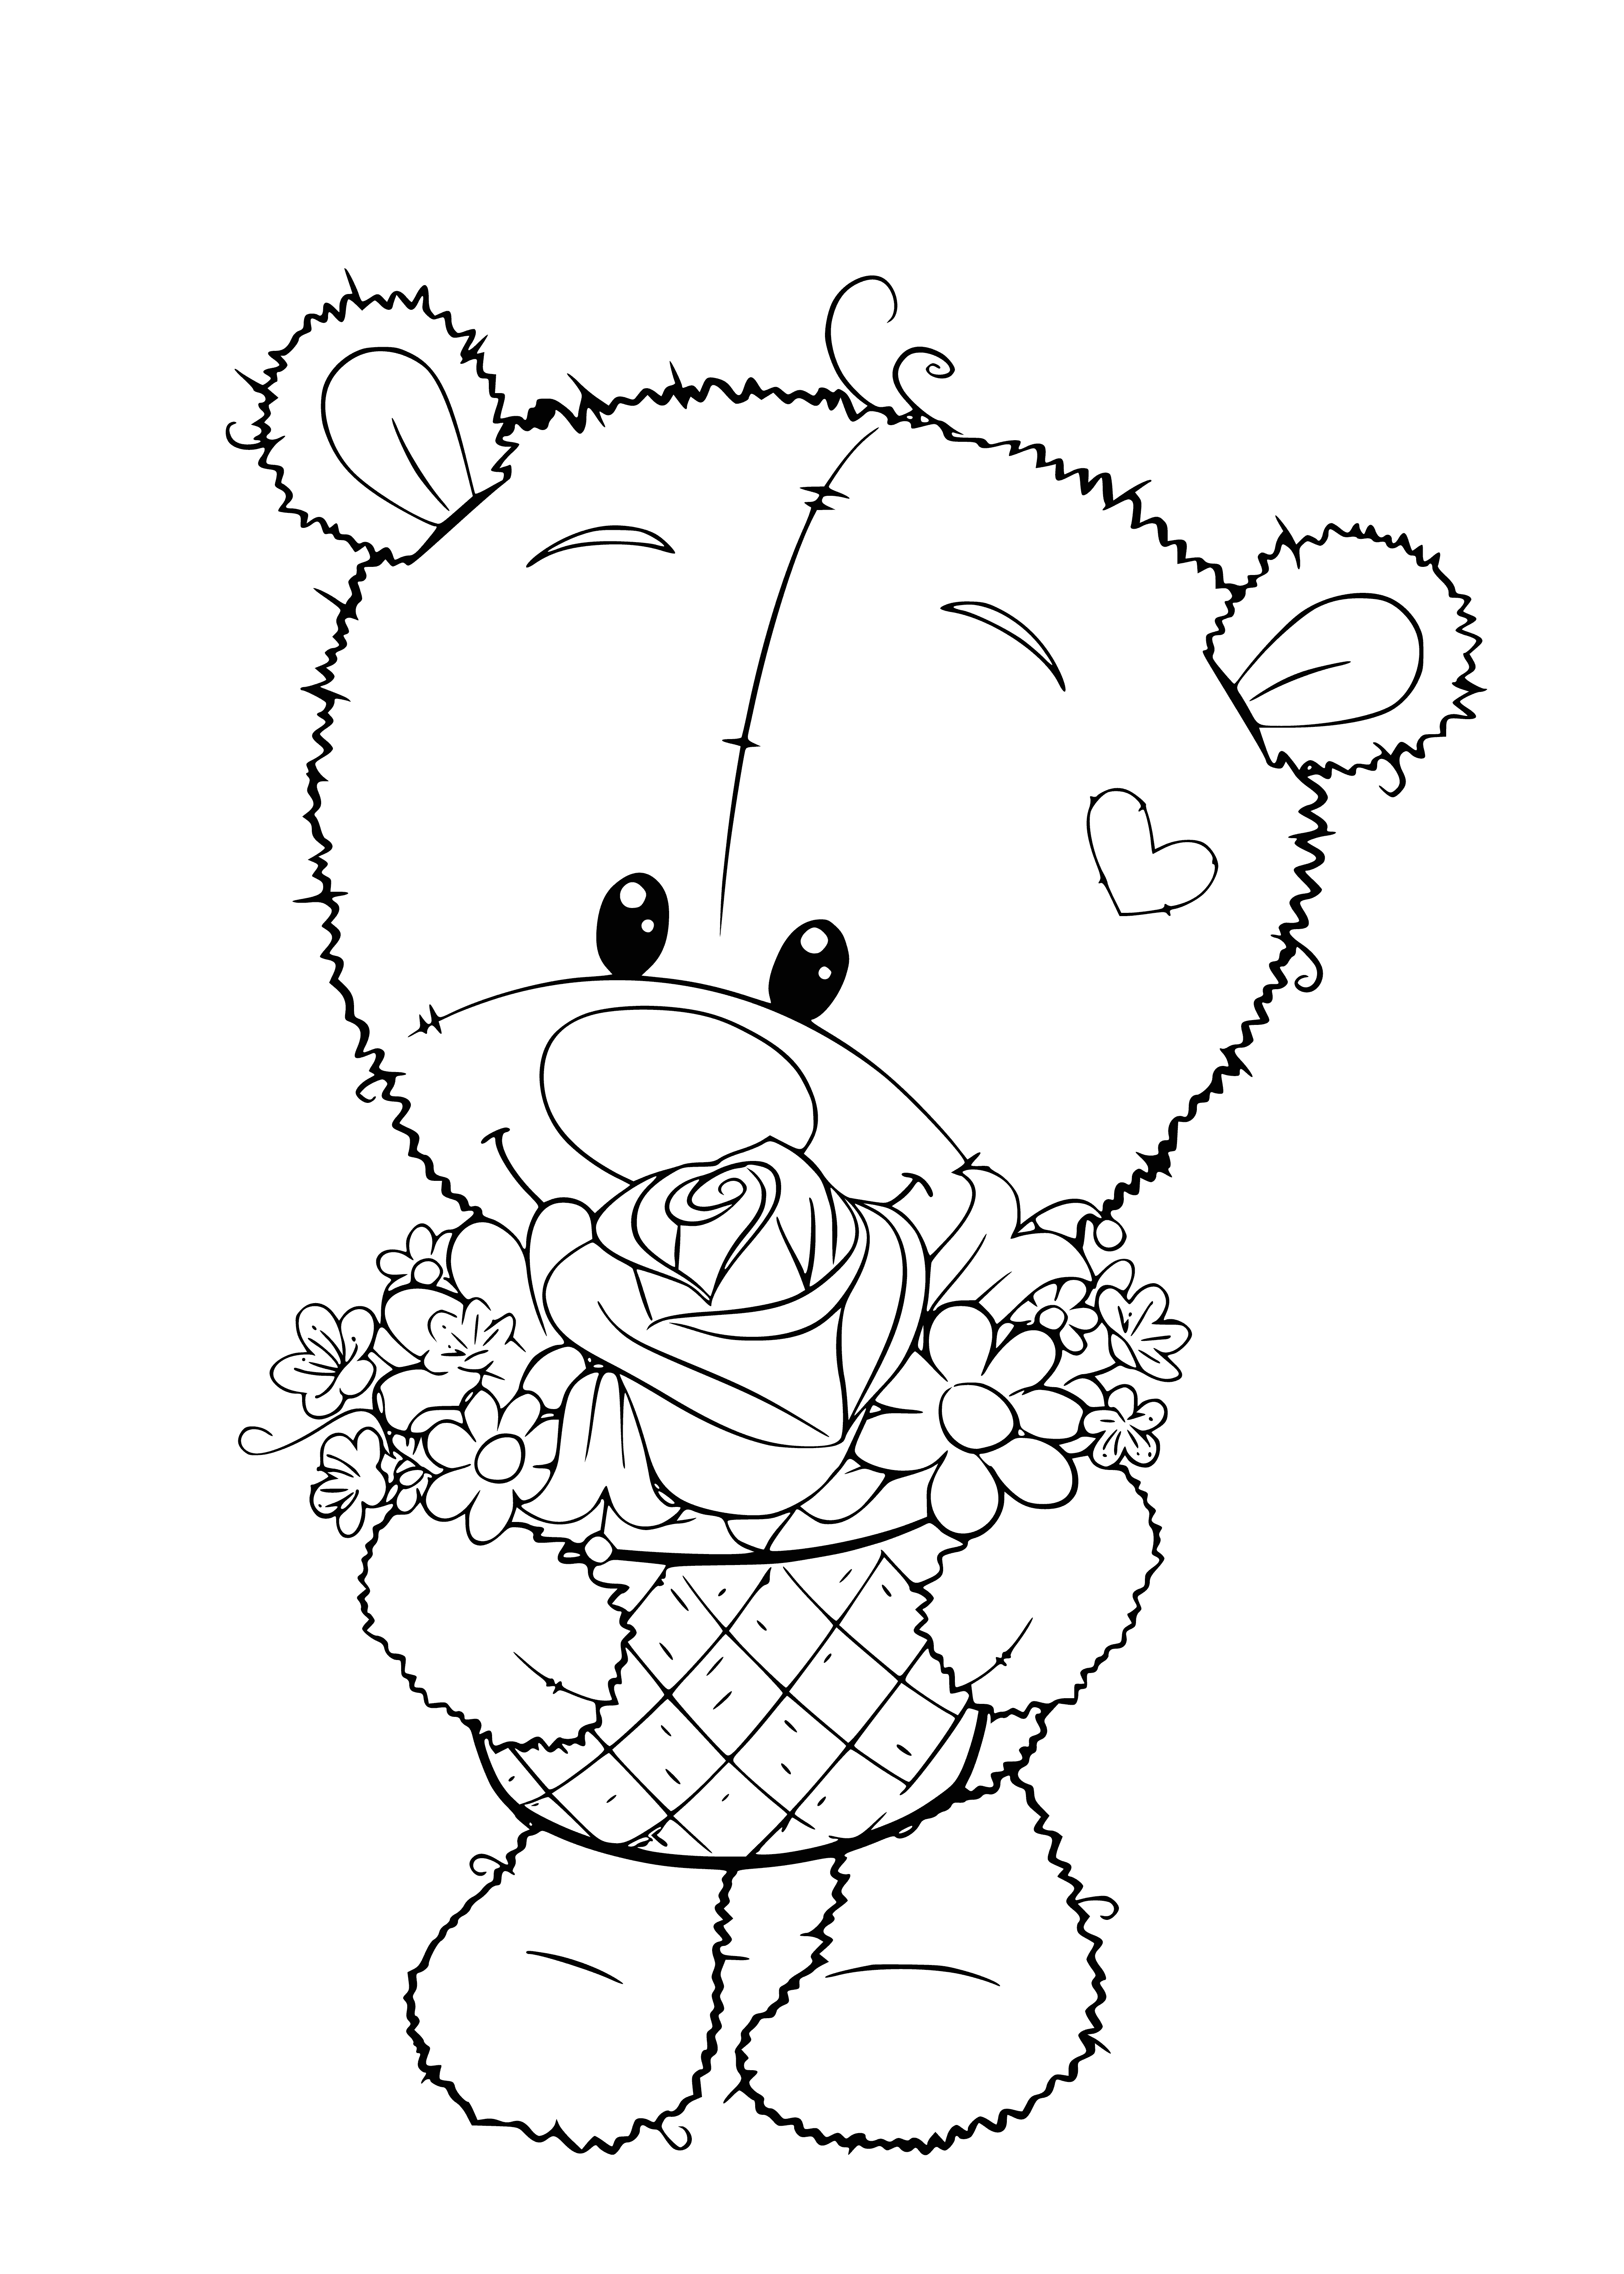 Teddy bear with flowers coloring page